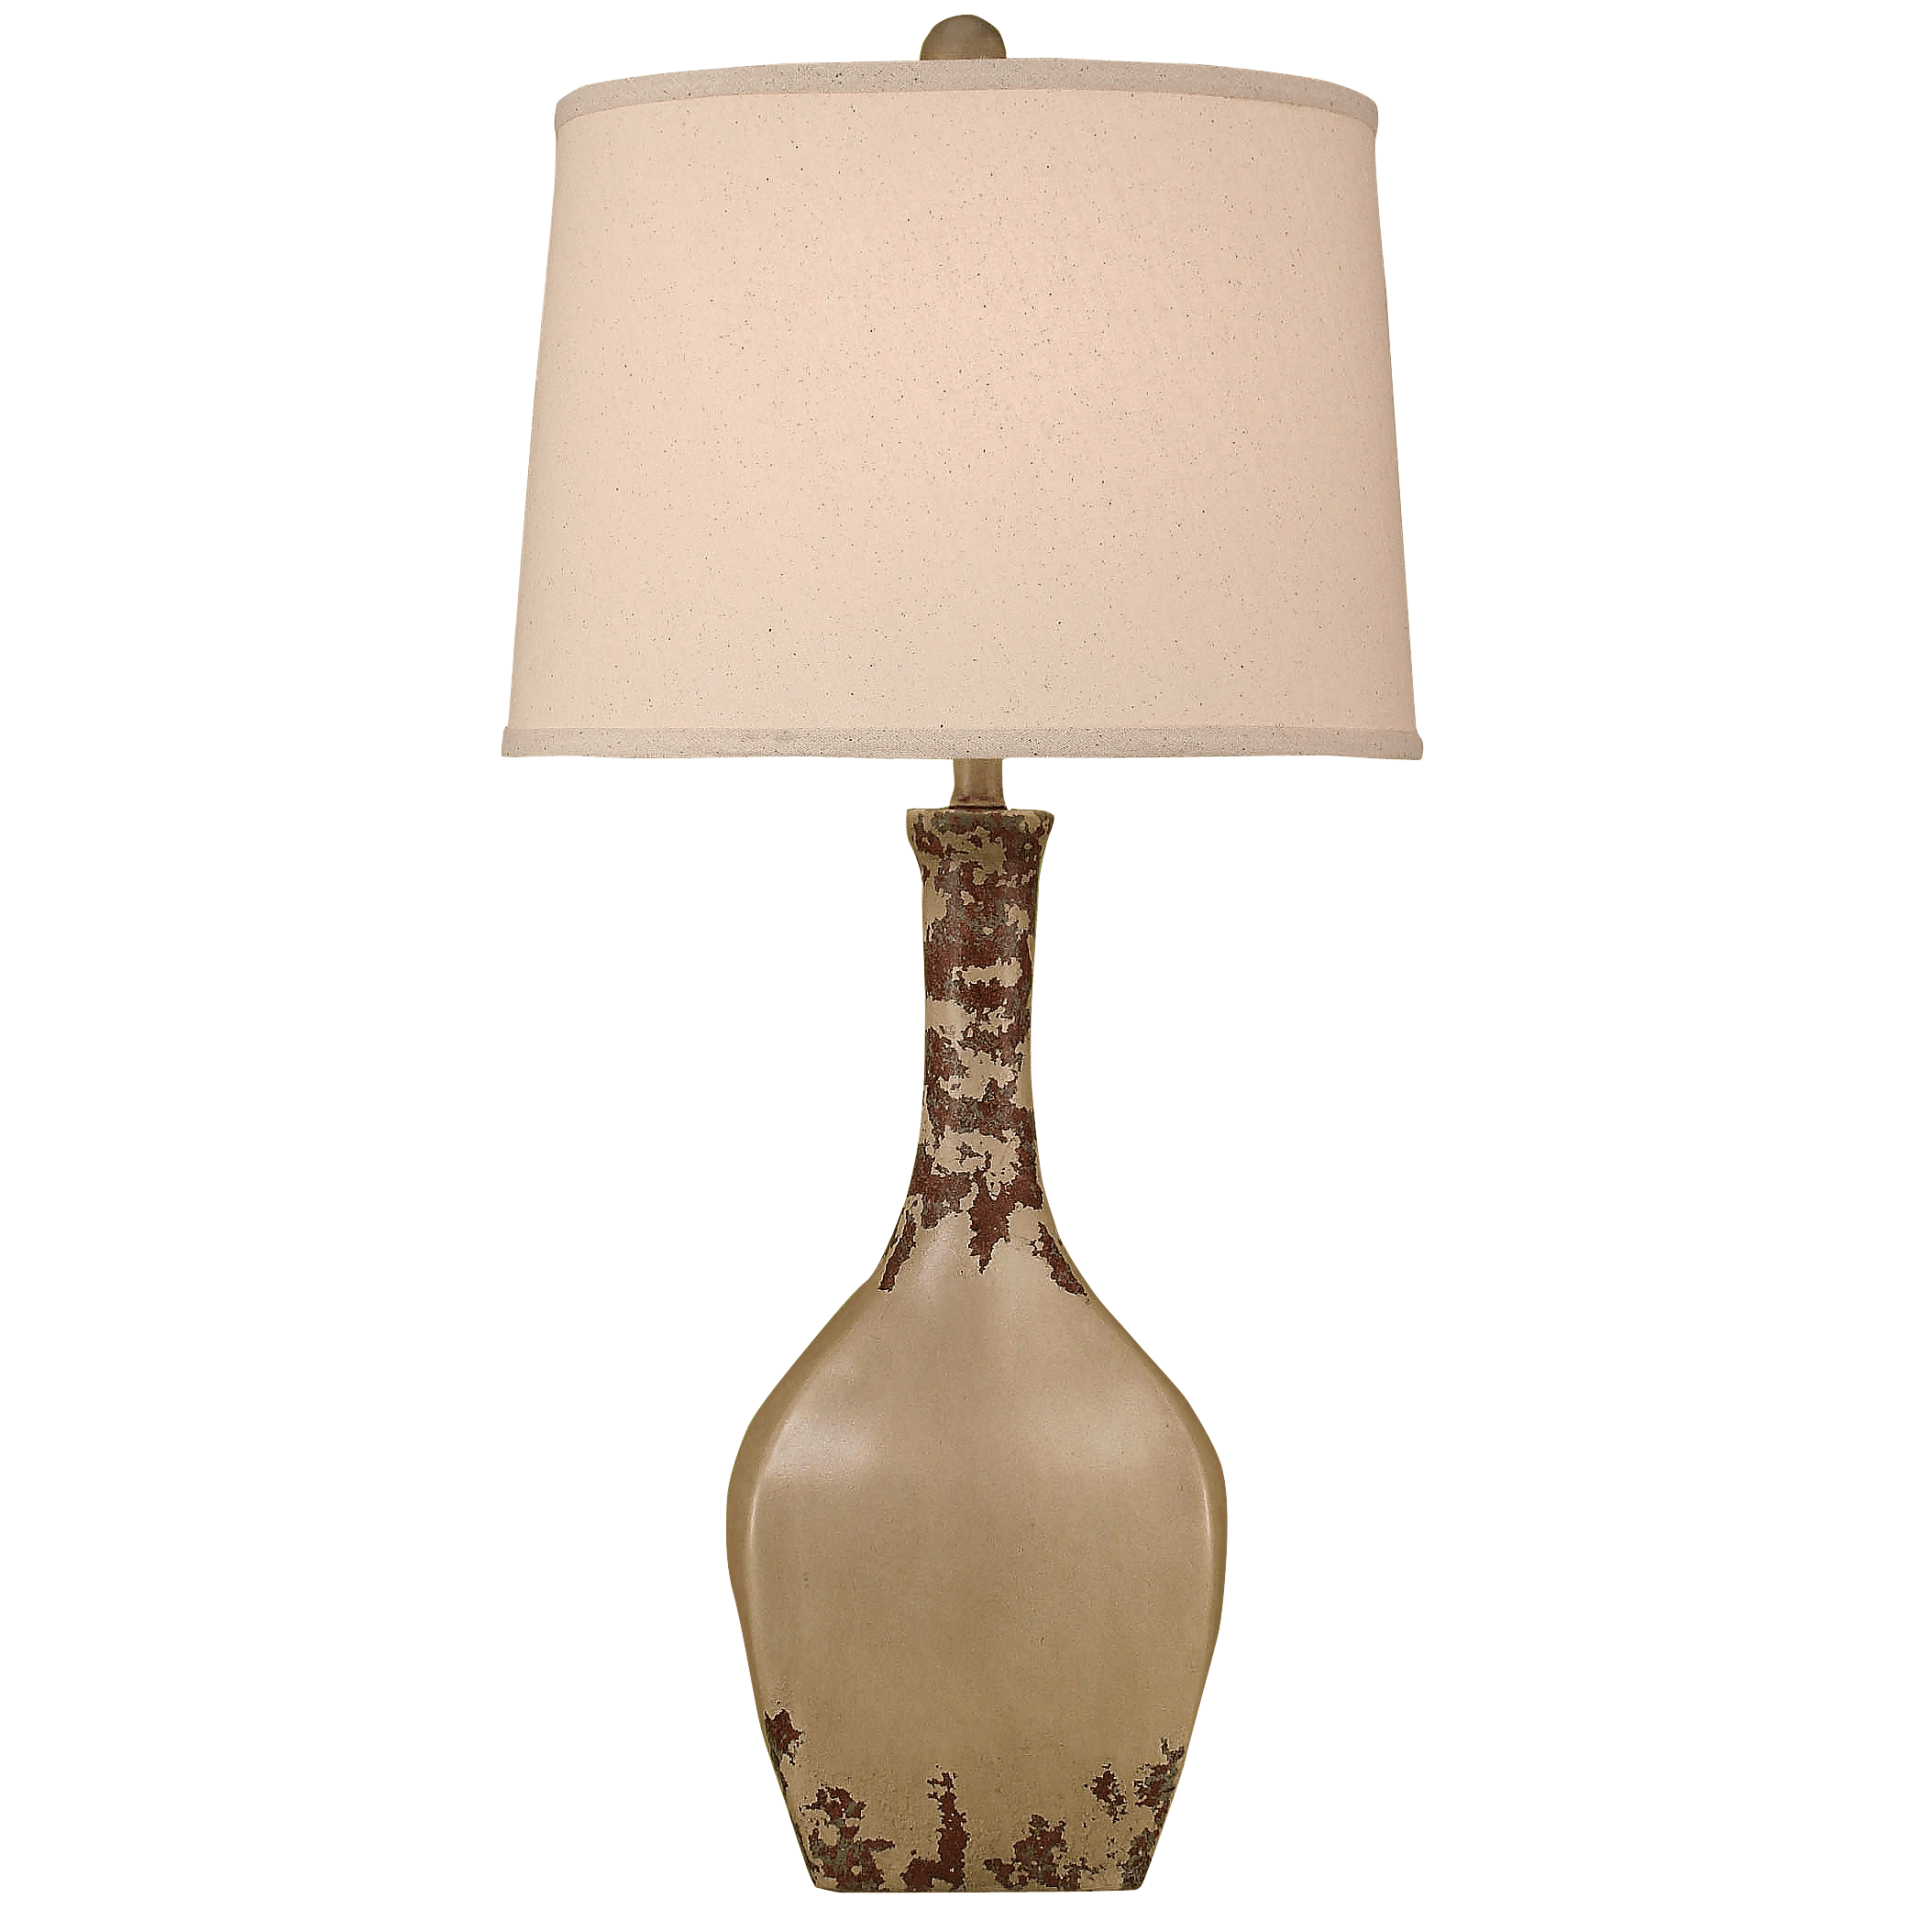 Oval Genie Table Lamp